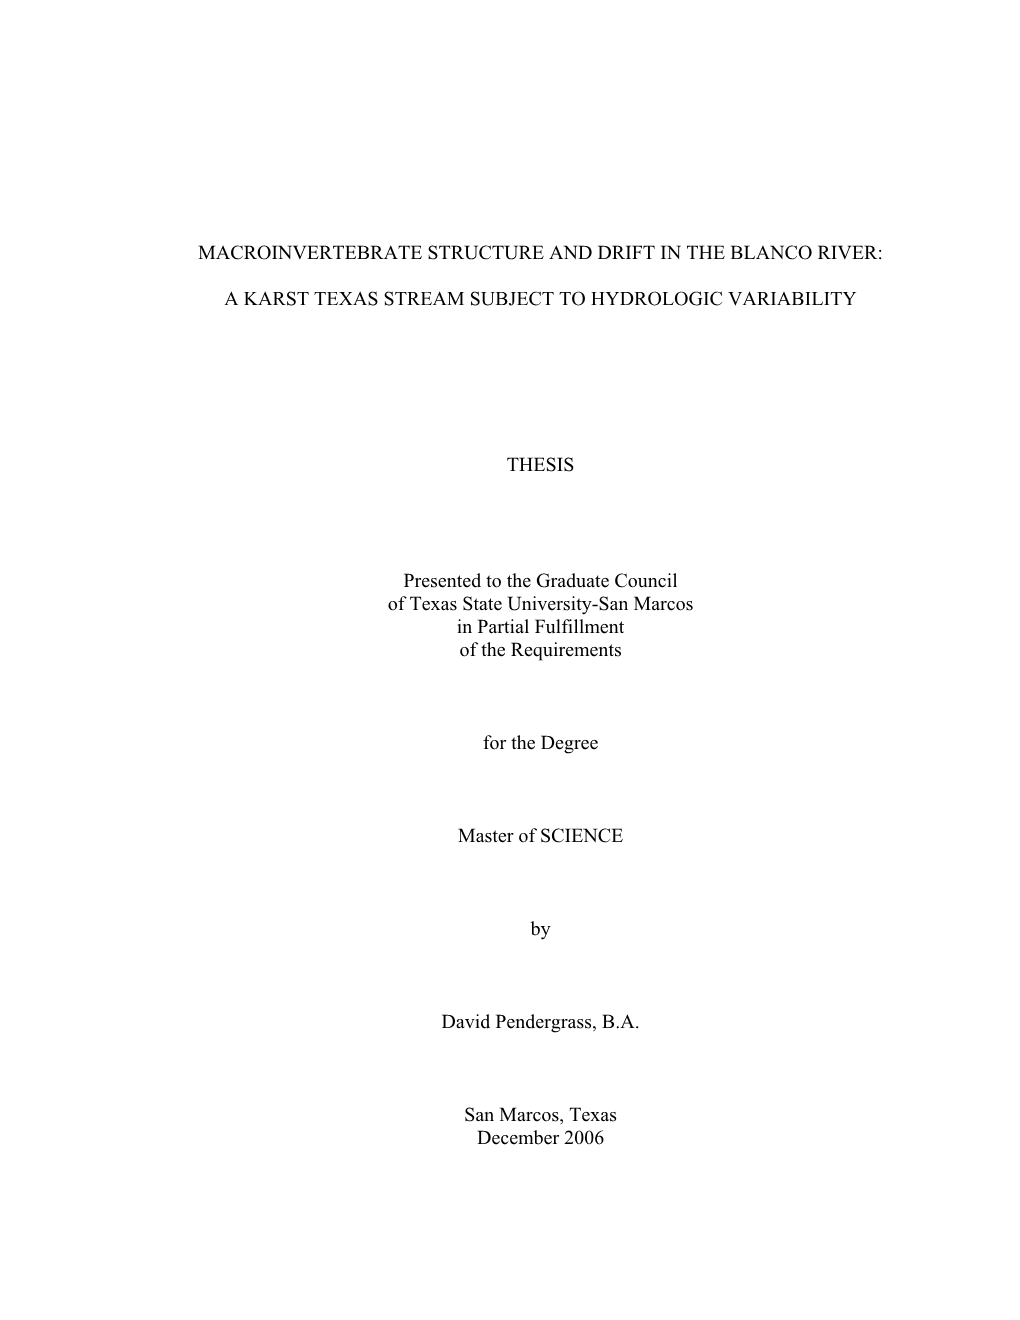 Working Copy of Thesis